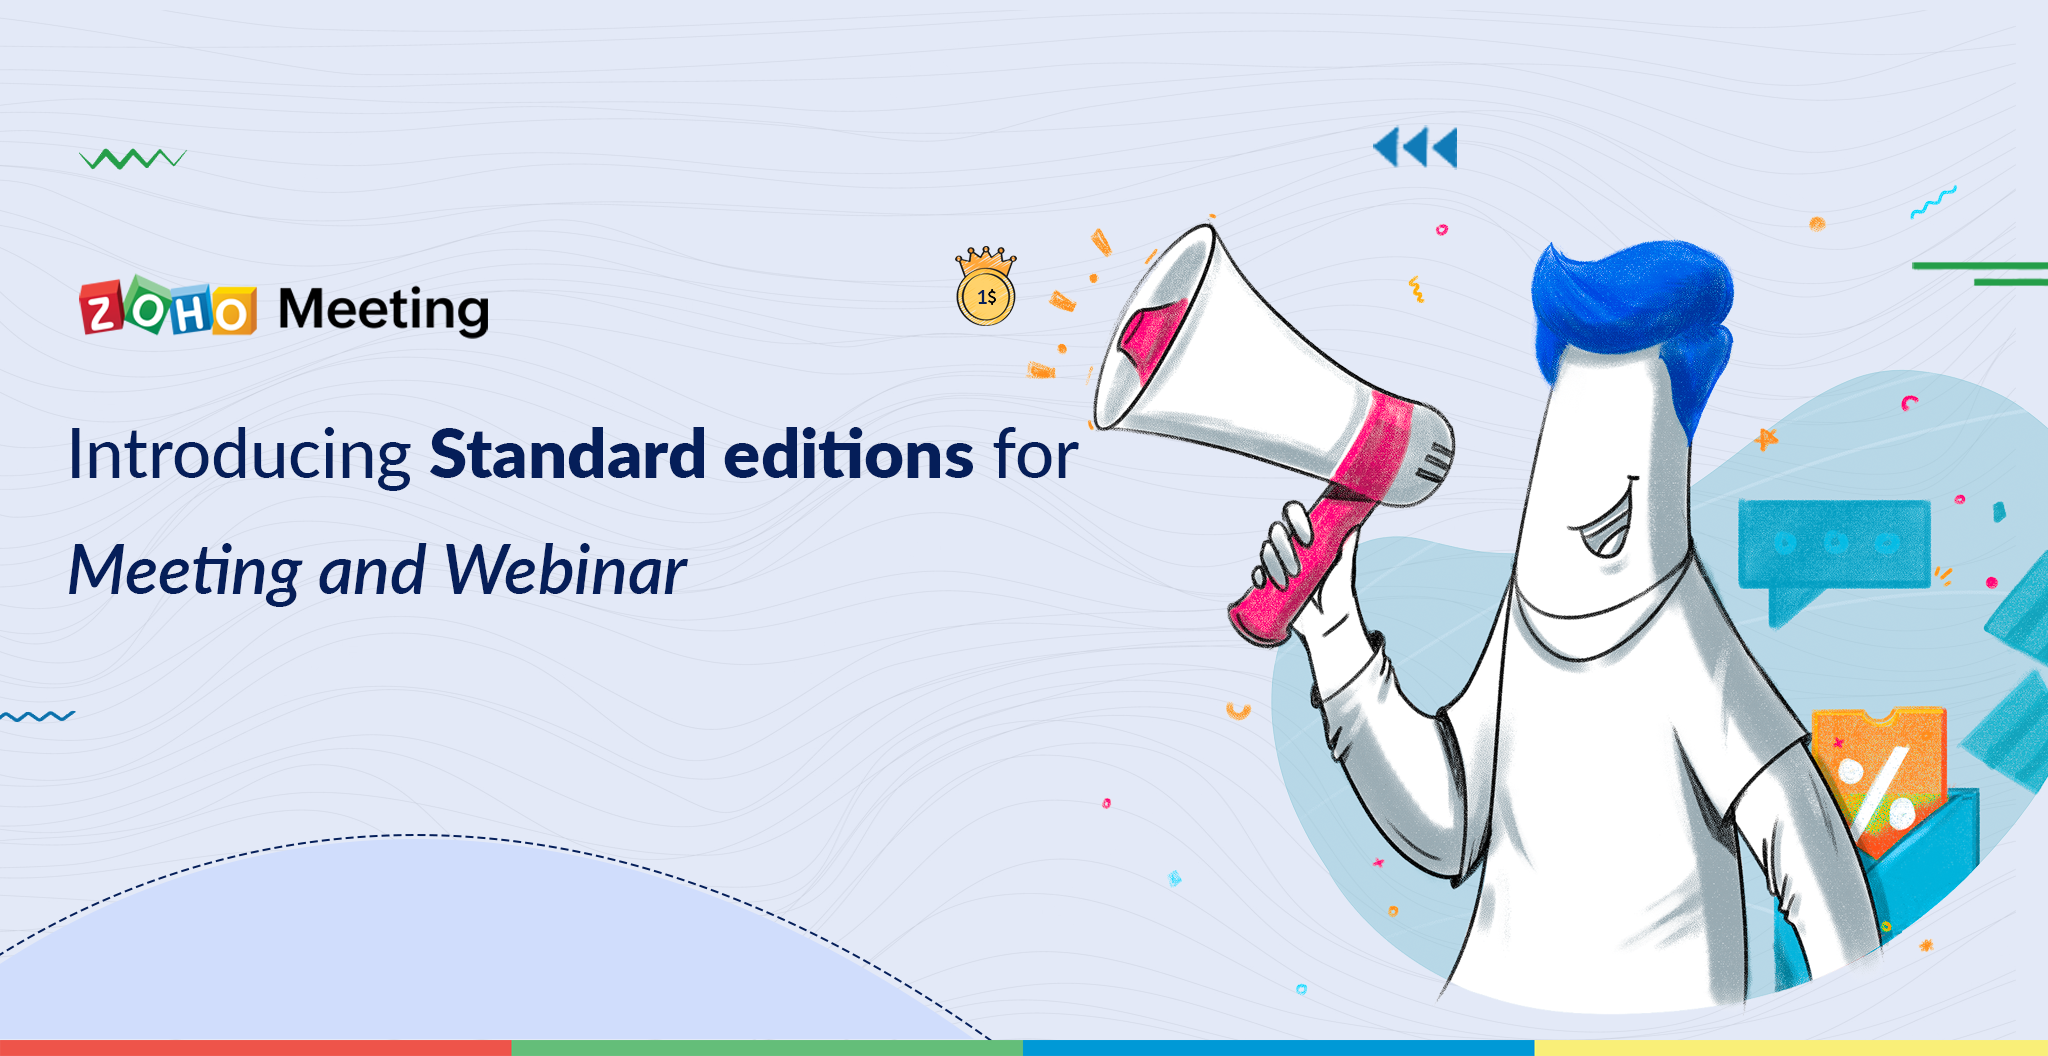 Introducing Zoho Meeting's Standard edition—starting at $1